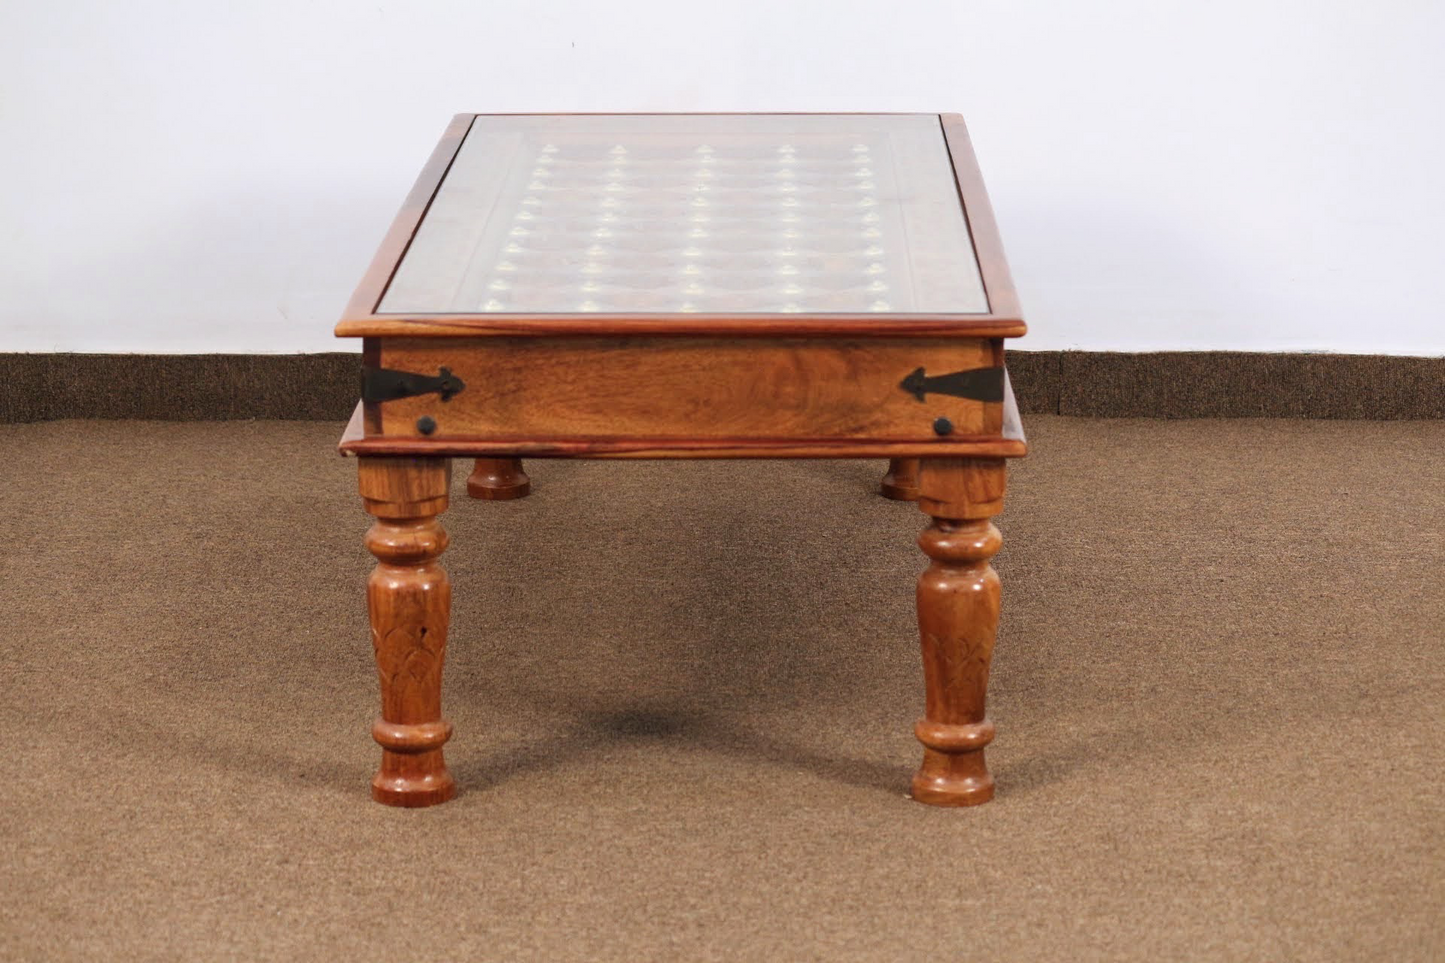 elevate your home with our Antique Carved Door Solid Wood Coffee Table with Vintage style Rajasthani Brass work and stunning carved door style. Upgrade your living room with our center table now !